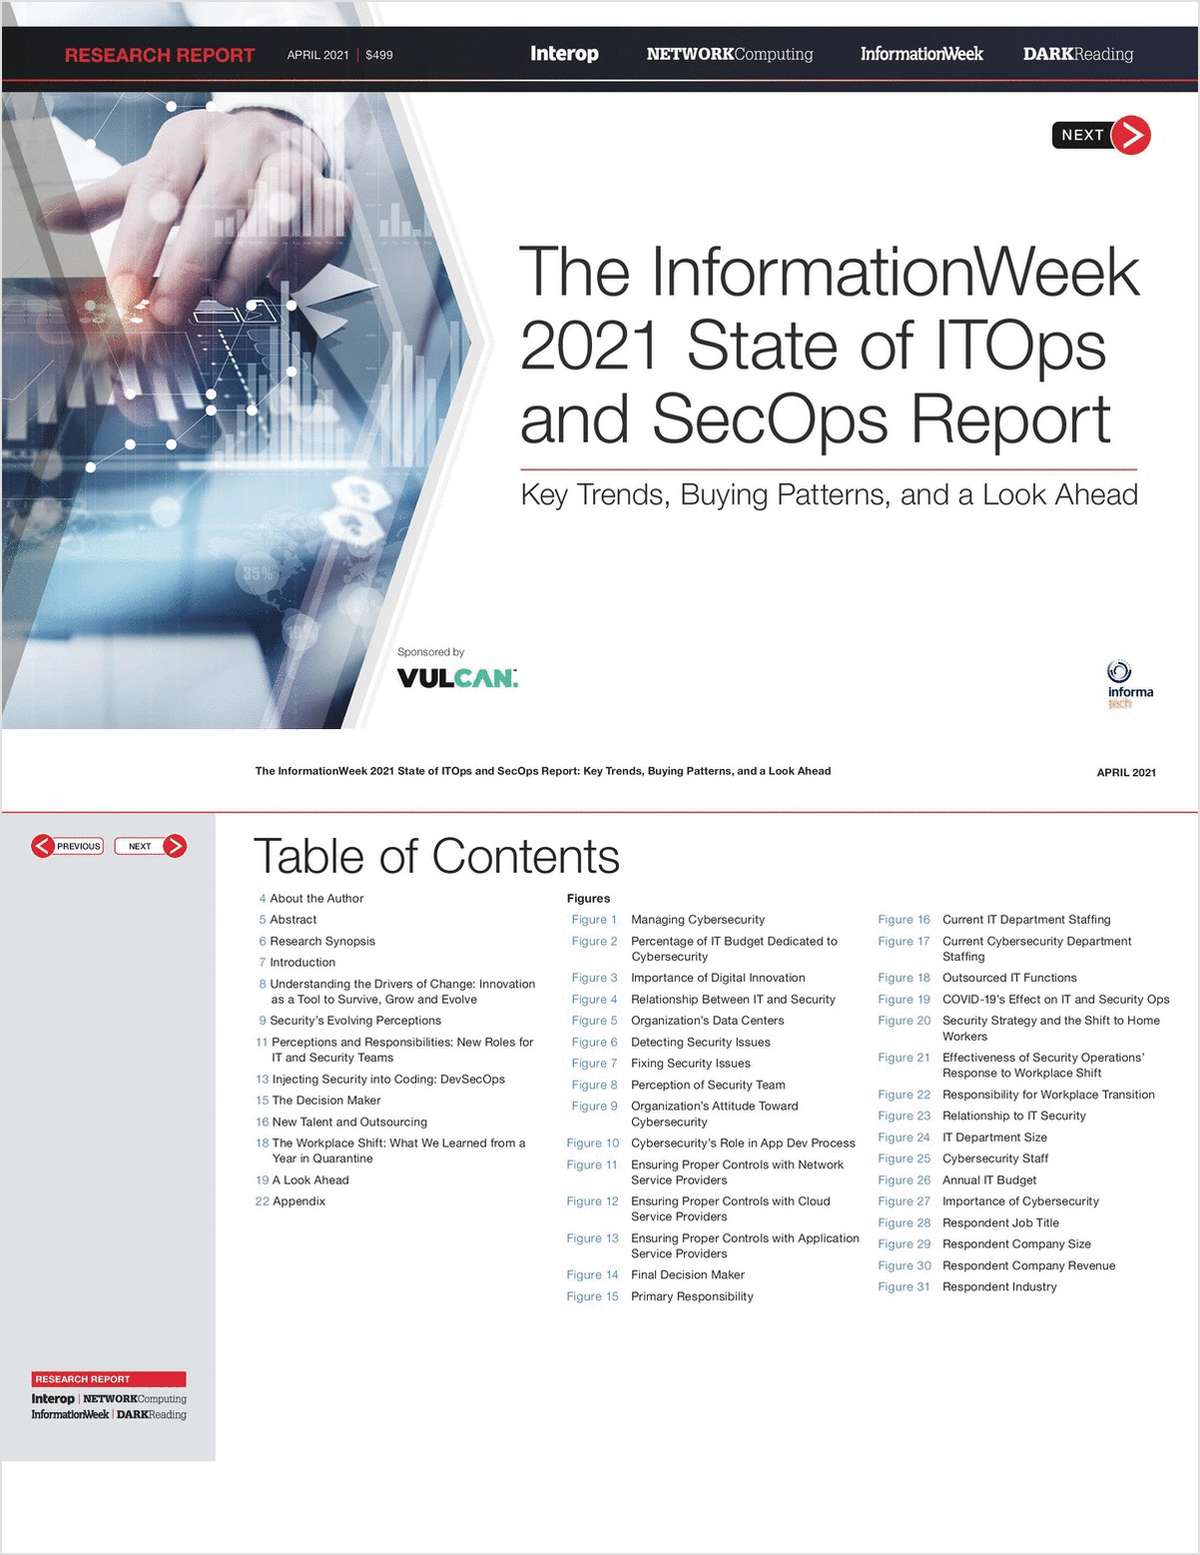 2021 State of ITOps and SecOps Report